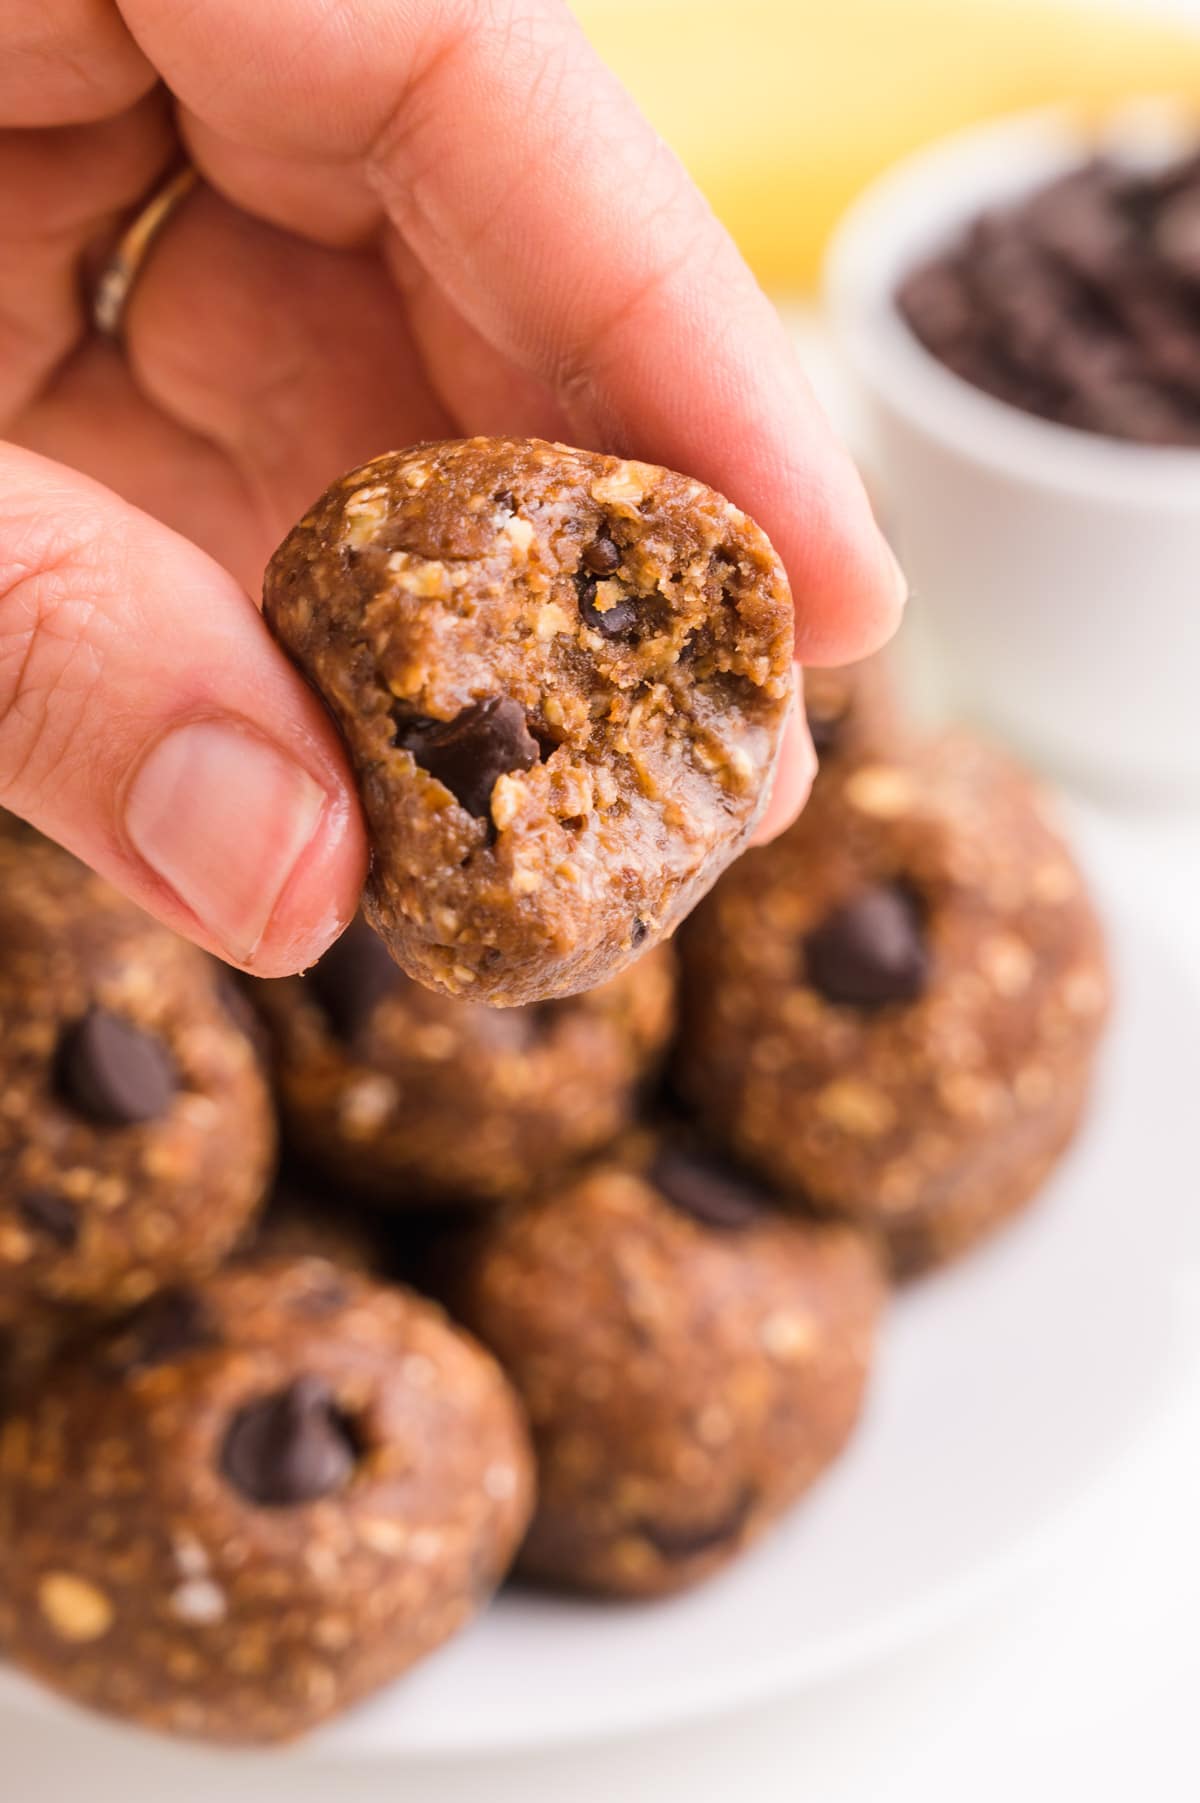 A hand holds a banana protein ball with a bite taken out. There are more in the background, along with chocolate chips and bananas.